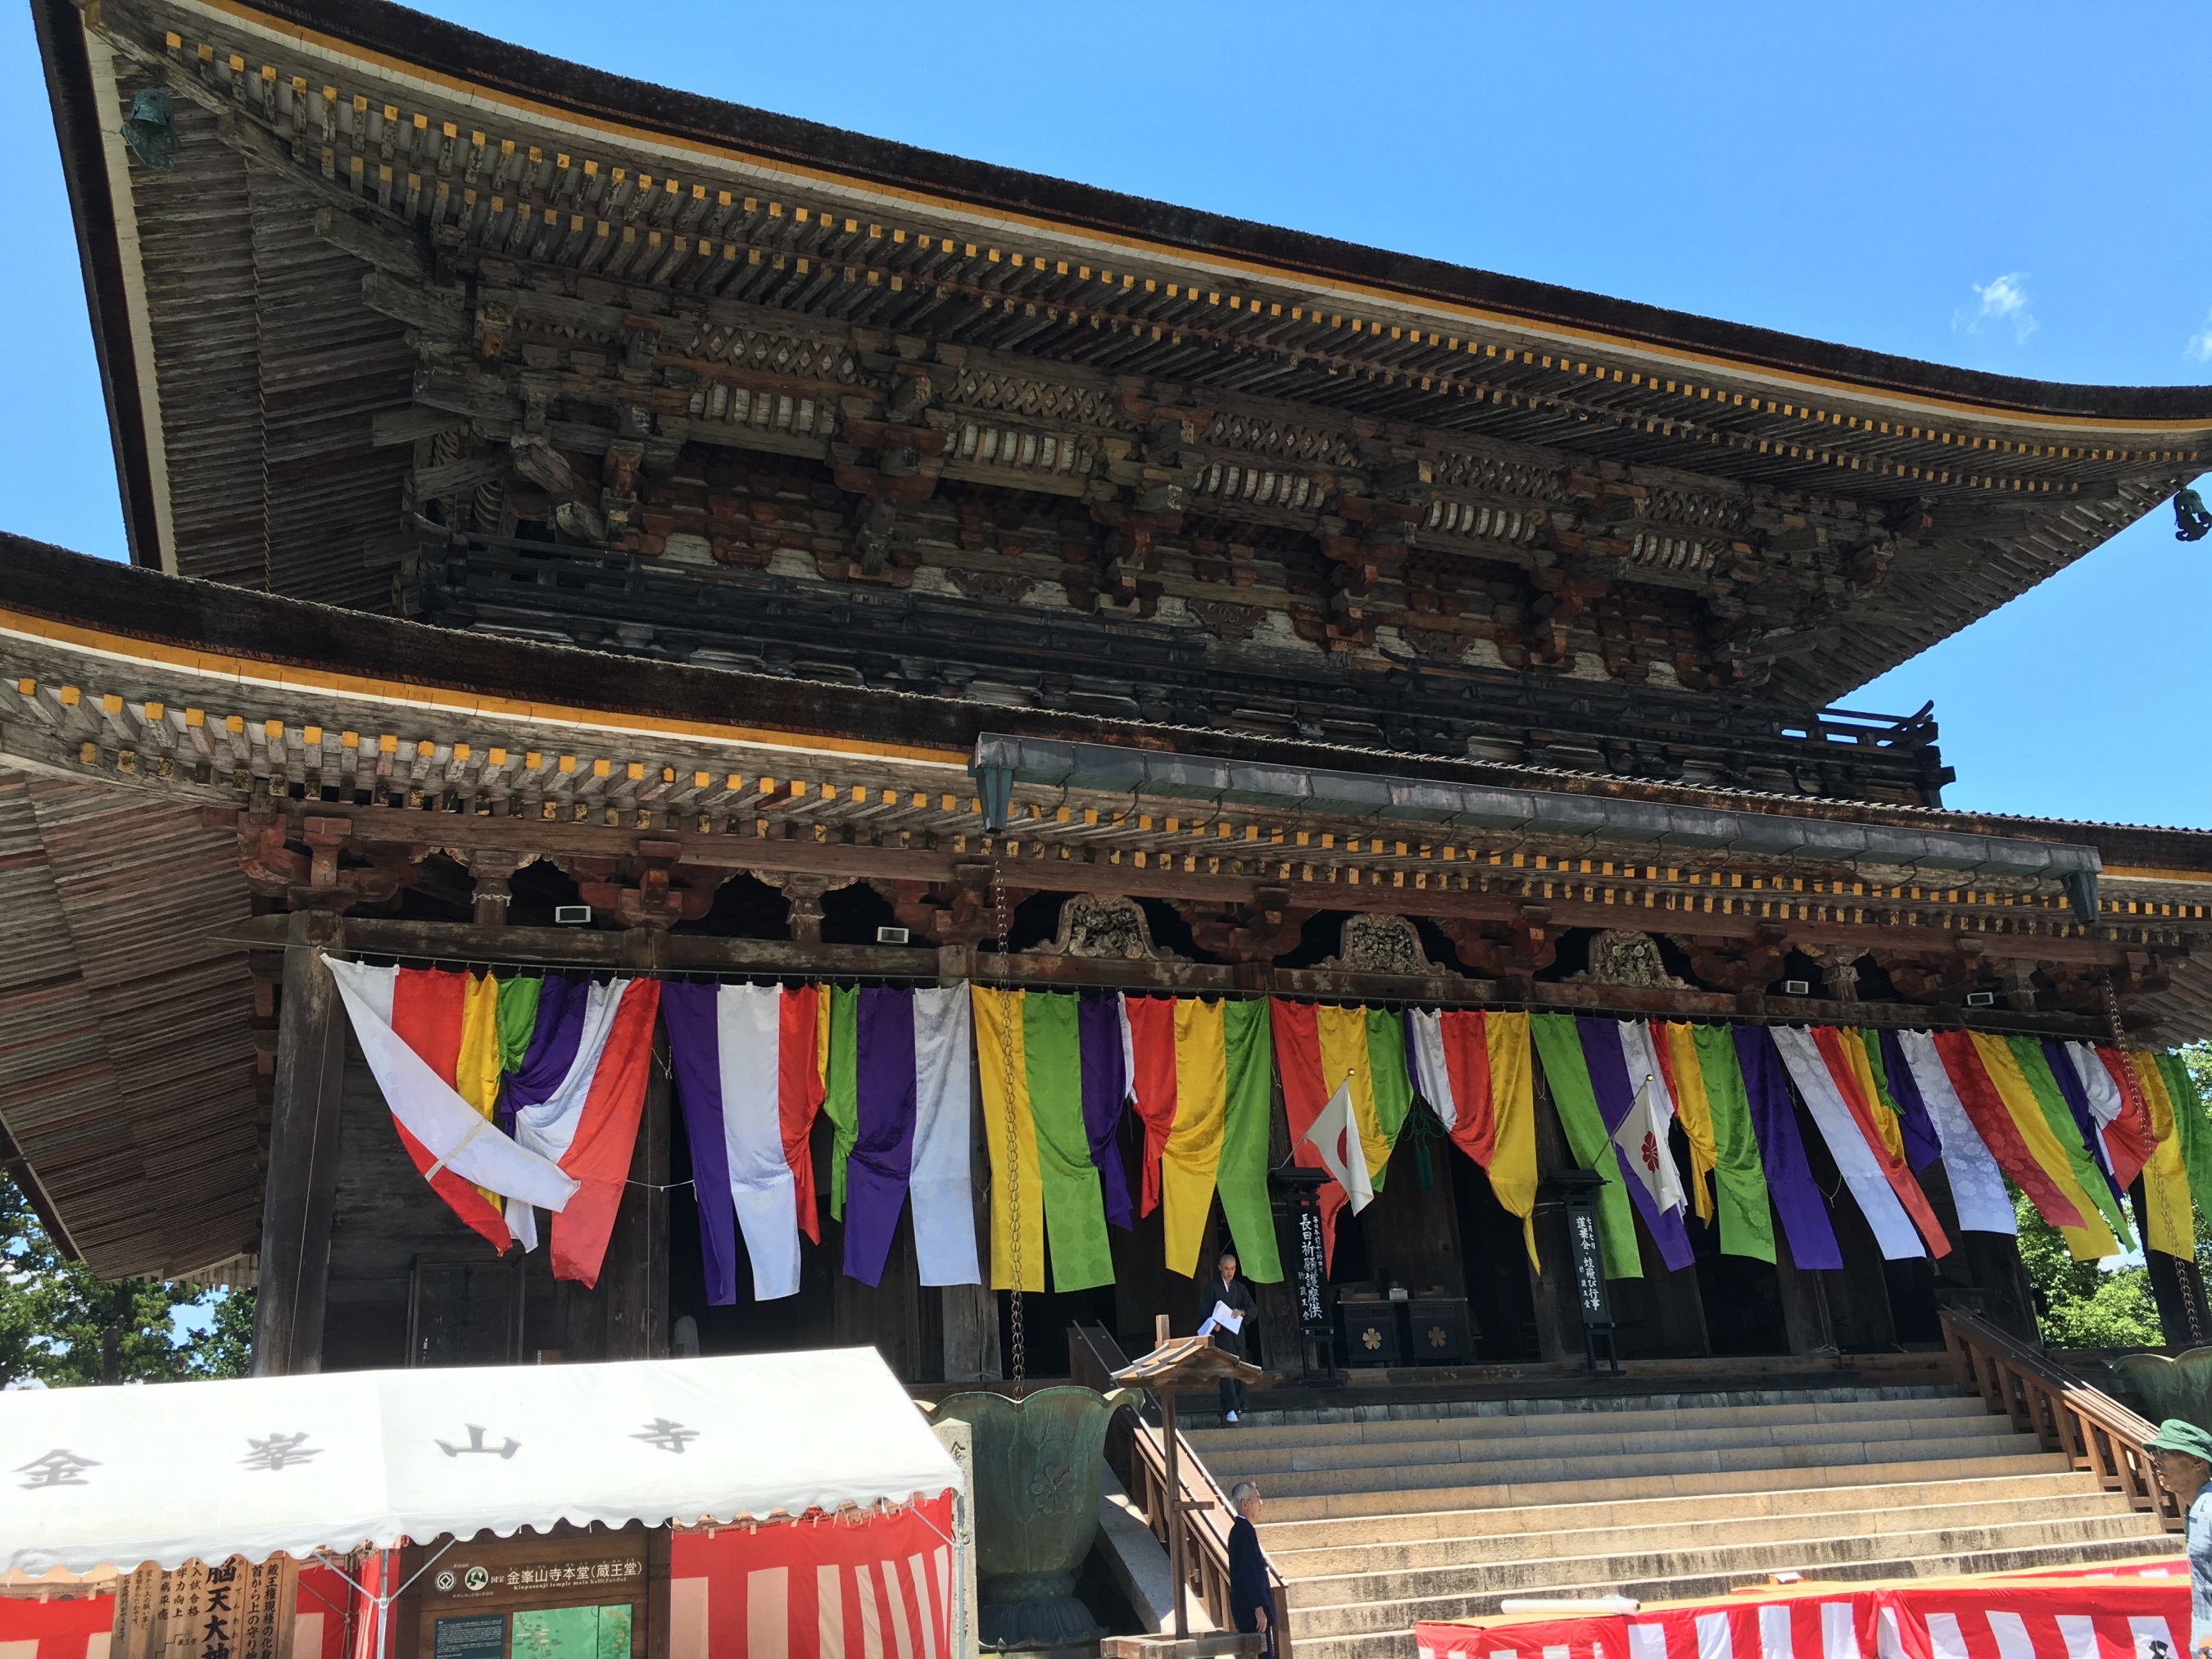 Here is a closer view of Kimpusen-ji Temple. The five coloured banners are only displayed during Festivals or other major events. I have read that they represent the five Chinese elements of earth, water, fire, metal and wood.